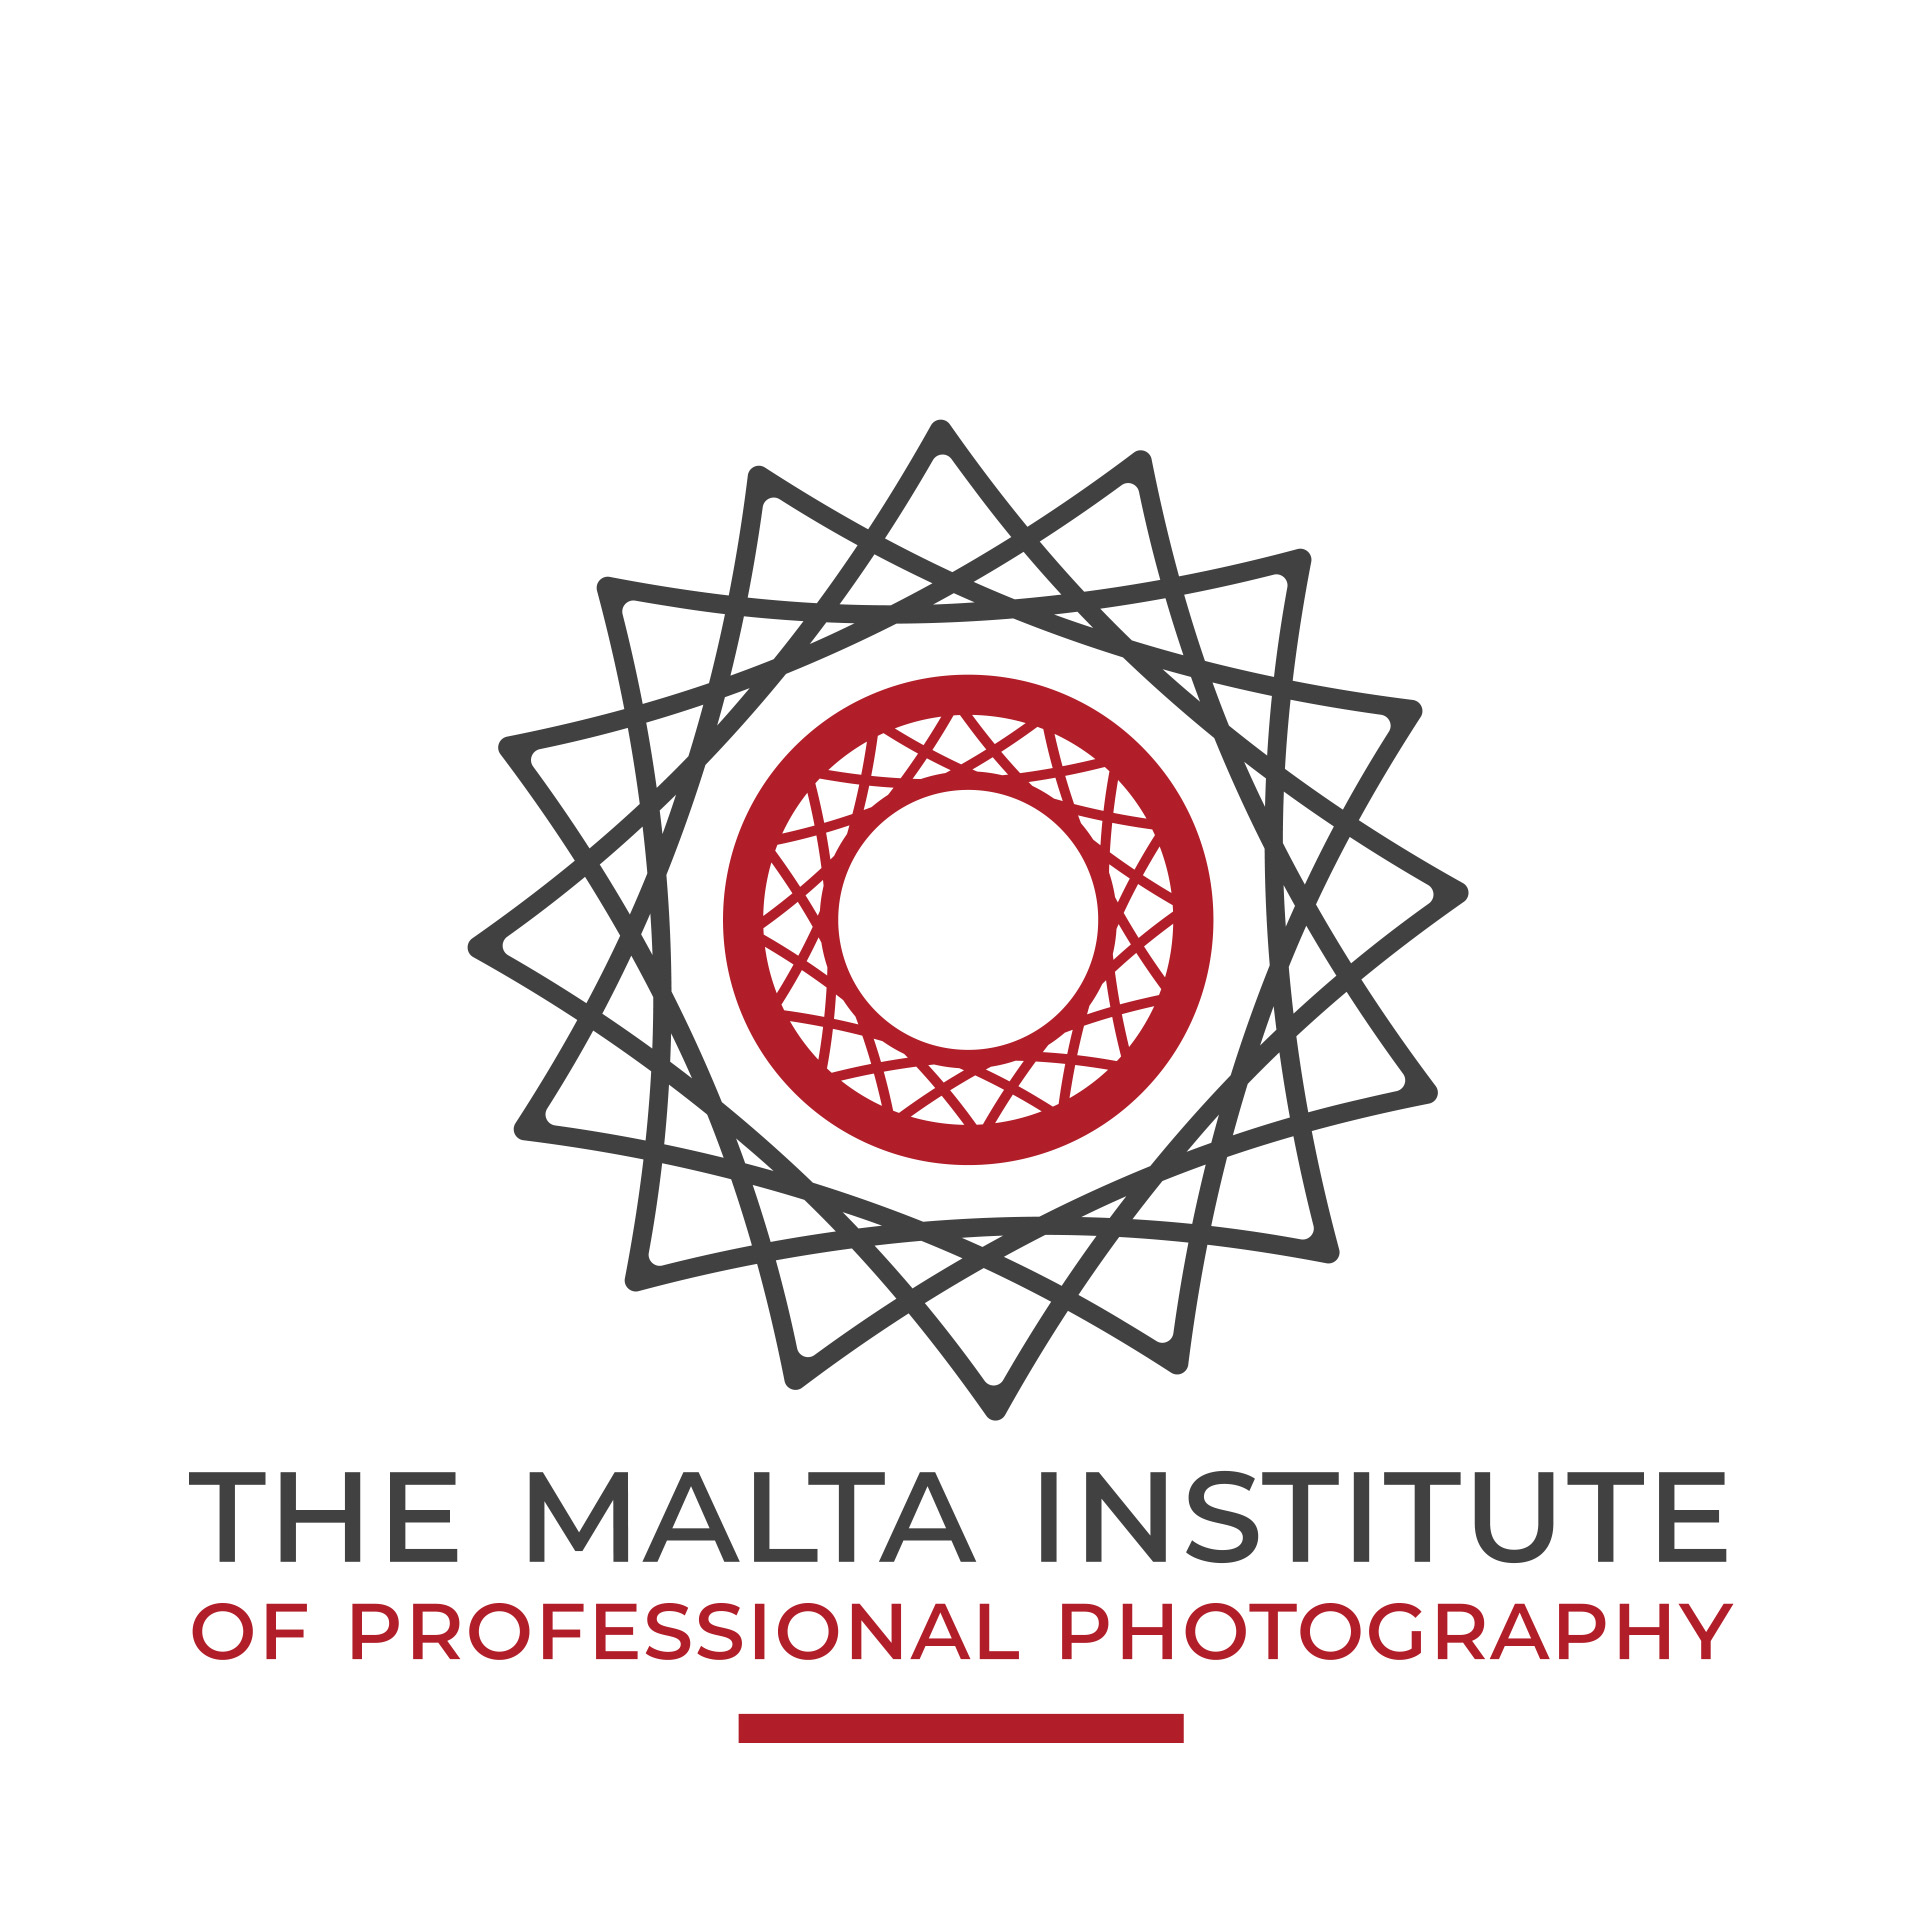 The Malta Institute of Professional Photography